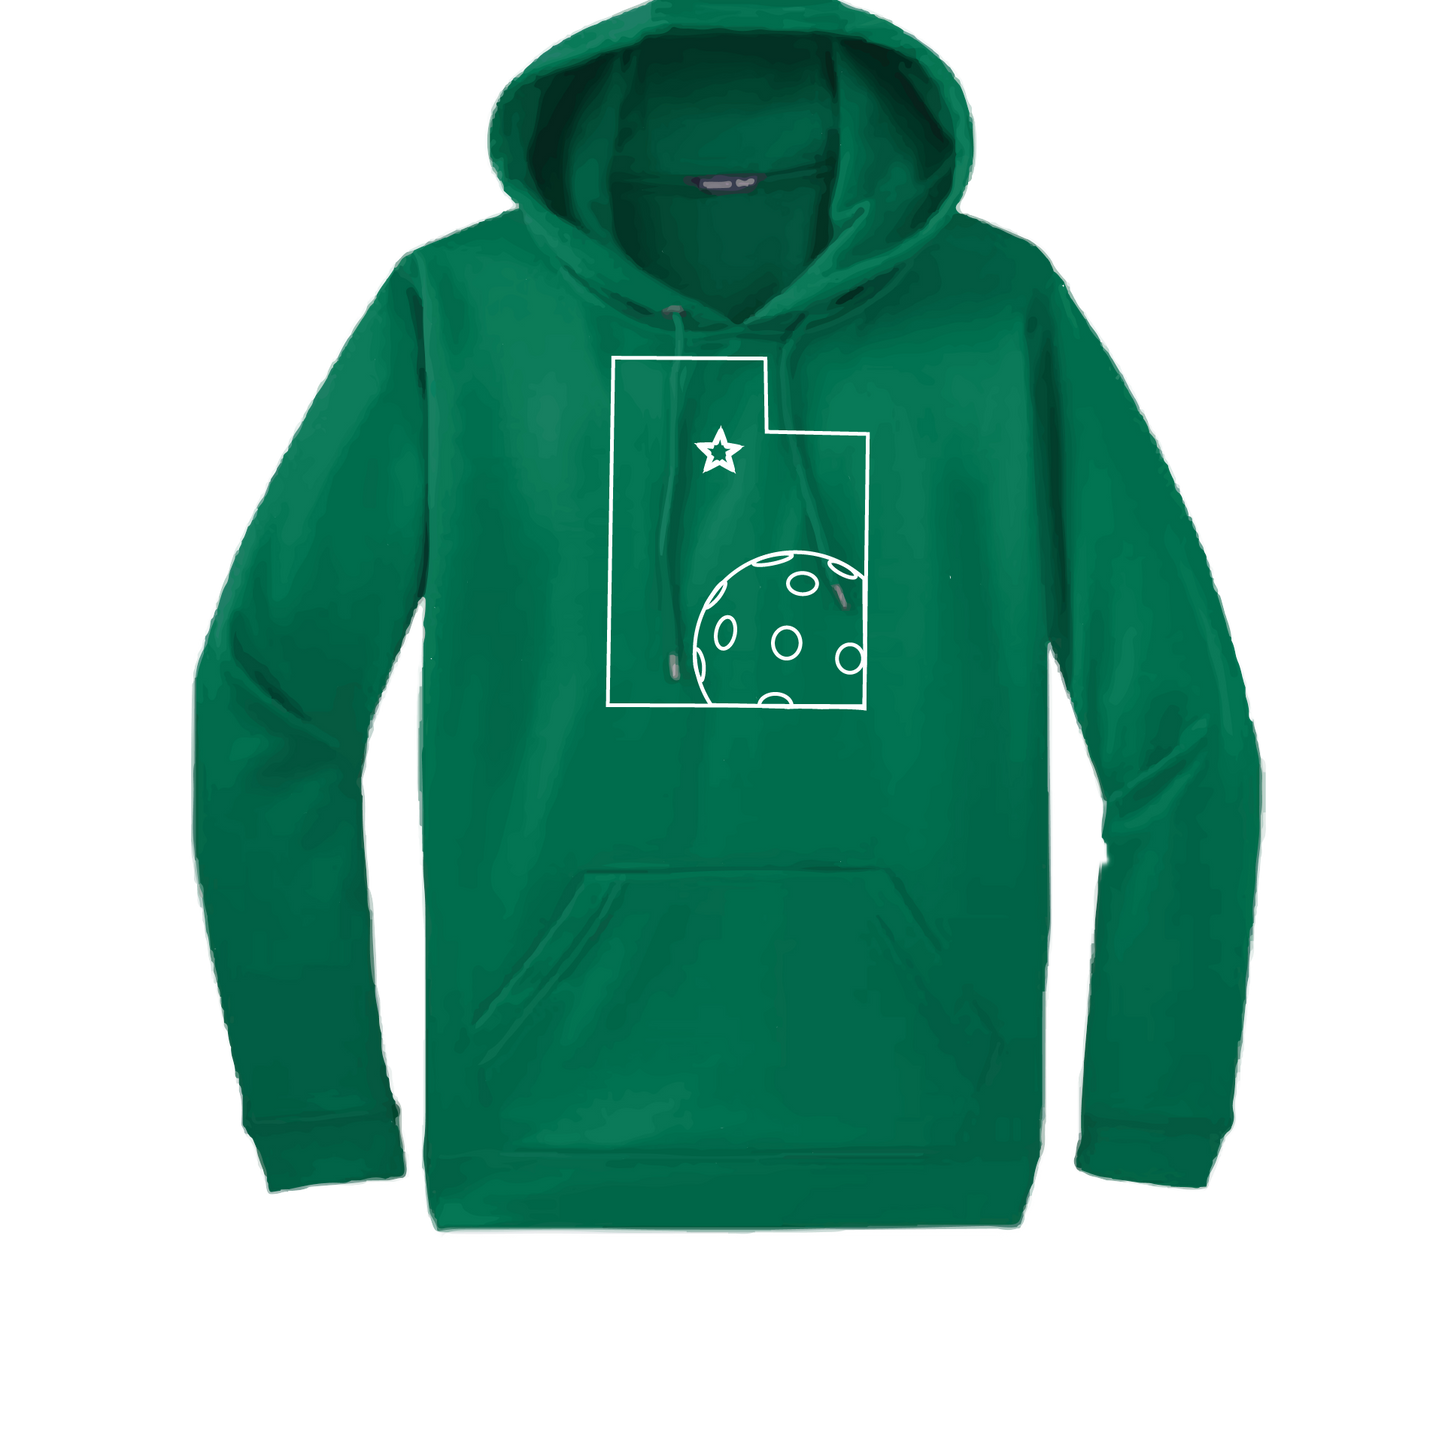 Pickleball Design: Utah Pickleball.   Unisex Hooded Sweatshirt: Moisture-wicking, double-lined hood, front pouch pocket.  This unisex hooded sweatshirt is ultra comfortable and soft. Stay warm on the Pickleball courts while being that hit with this one of kind design.